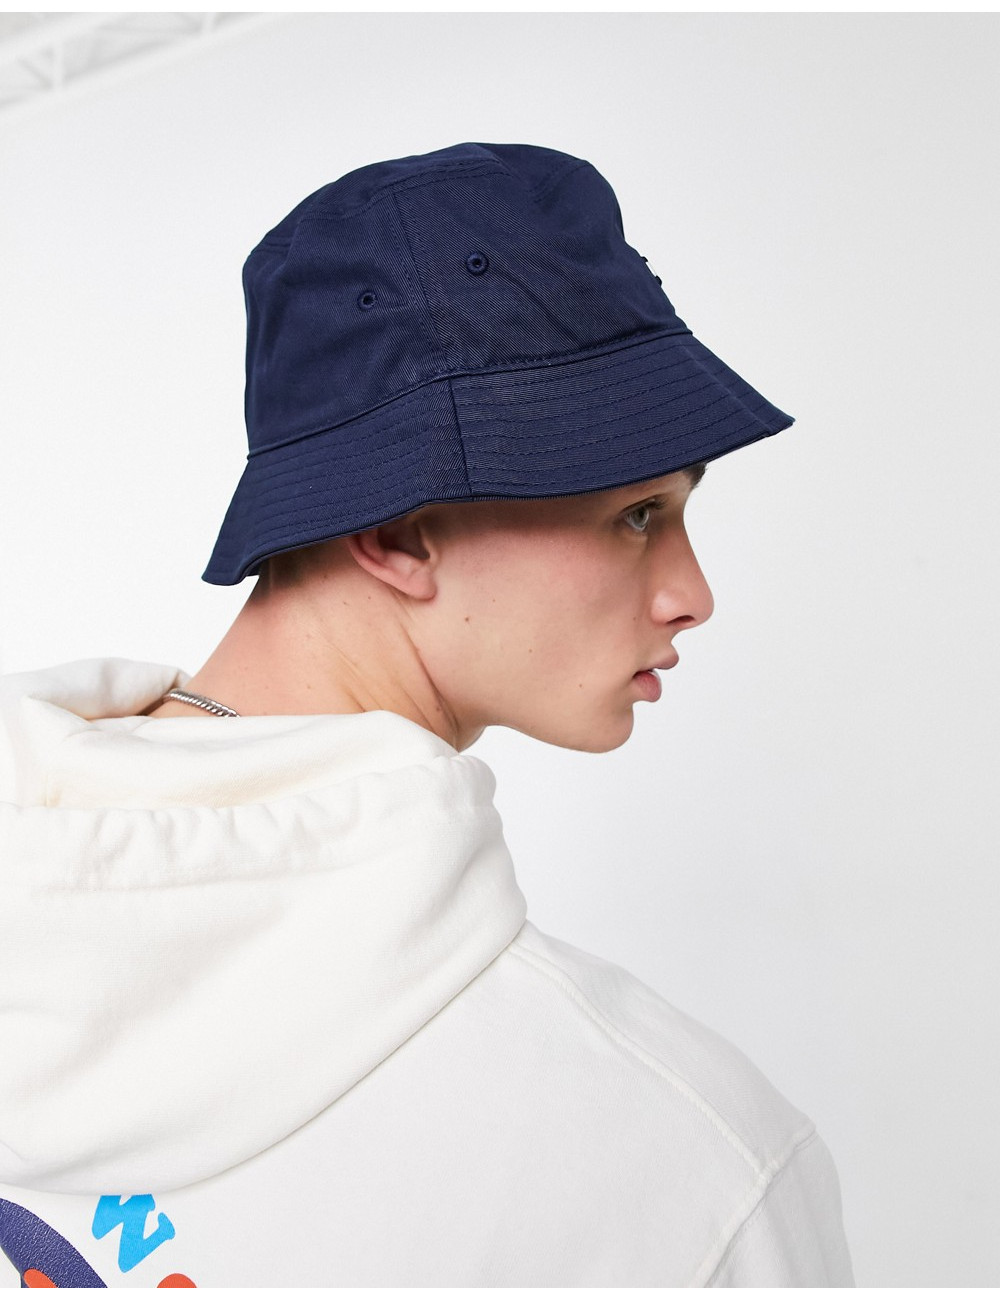 Tommy Jeans bucket hat with...